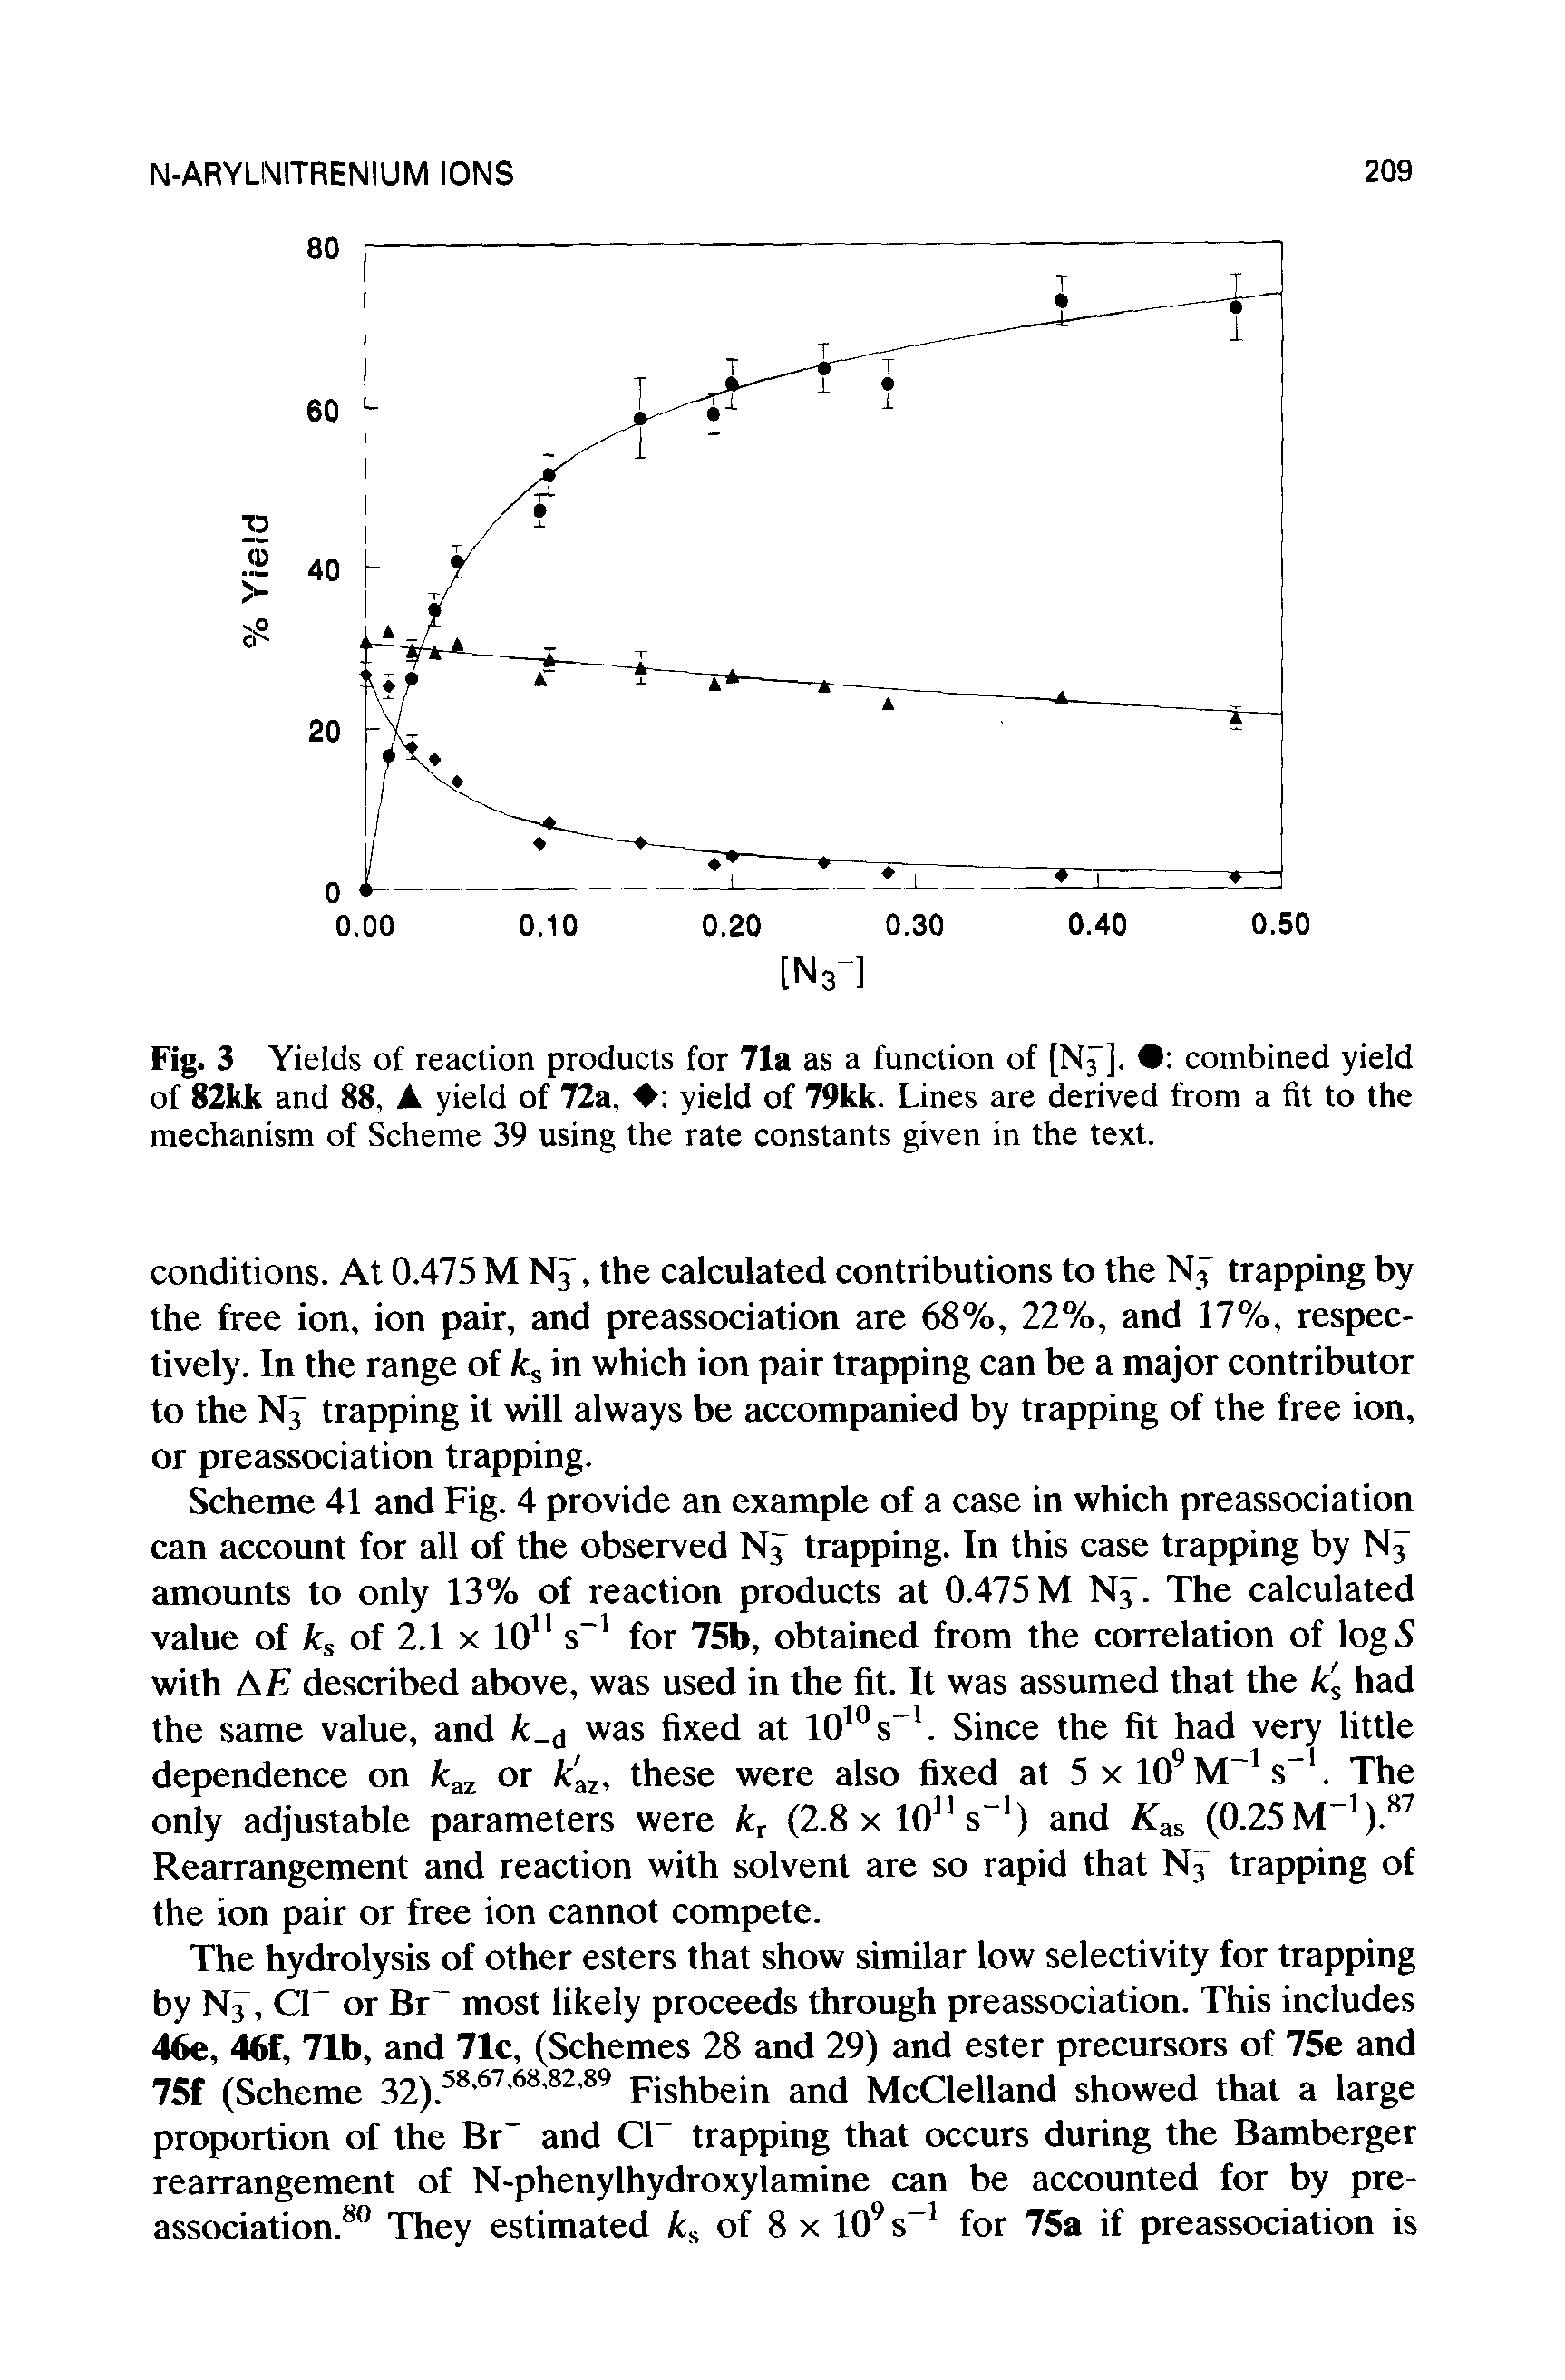 Fig. 3 Yields of reaction products for 71a as a function of [N3 ]. combined yield of 82I(Jt and 88, A yield of 72a, yield of 79kk. Lines are derived from a fit to the mechanism of Scheme 39 using the rate constants given in the text.